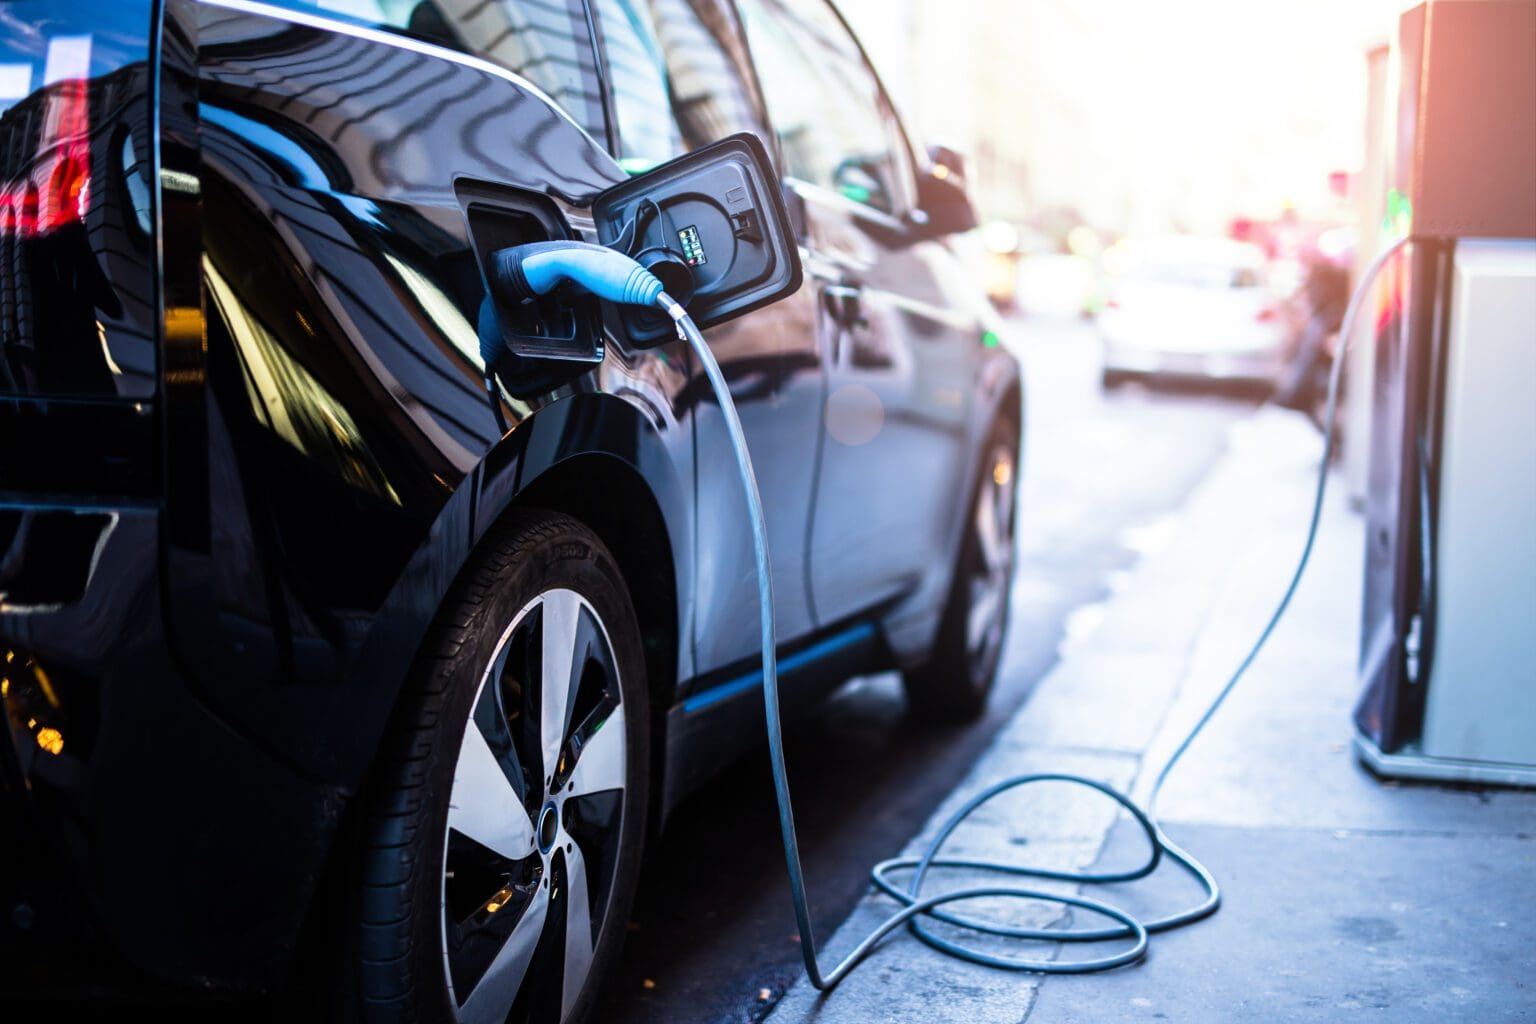 Soaring Energy Prices to Set Back the Spread of Electric Vehicles